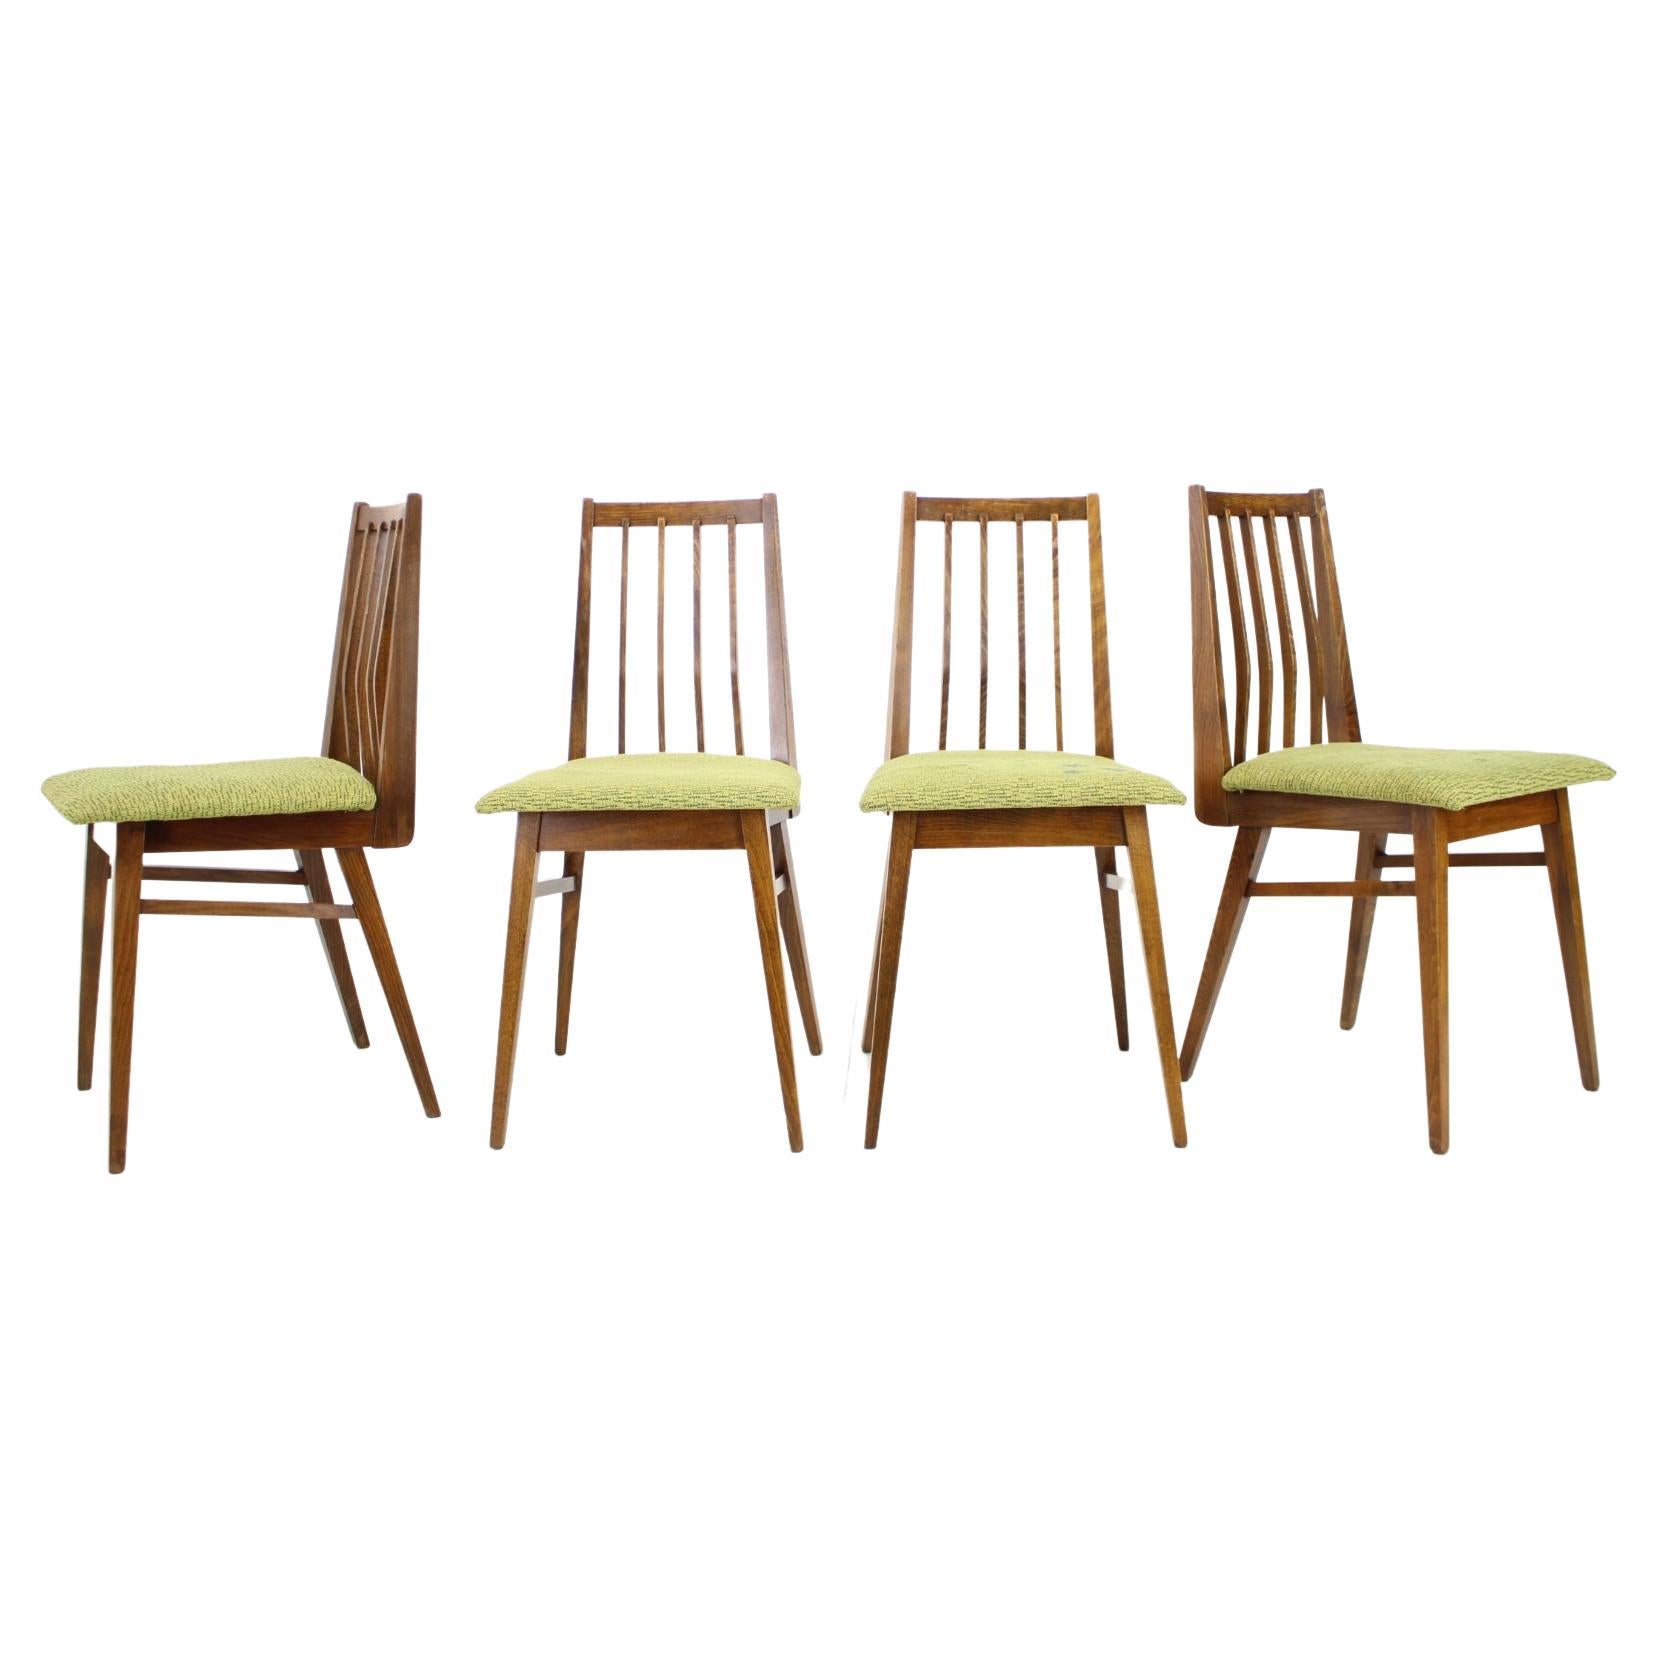 1960s Set of Four Dining Chairs, Czechoslovakia For Sale